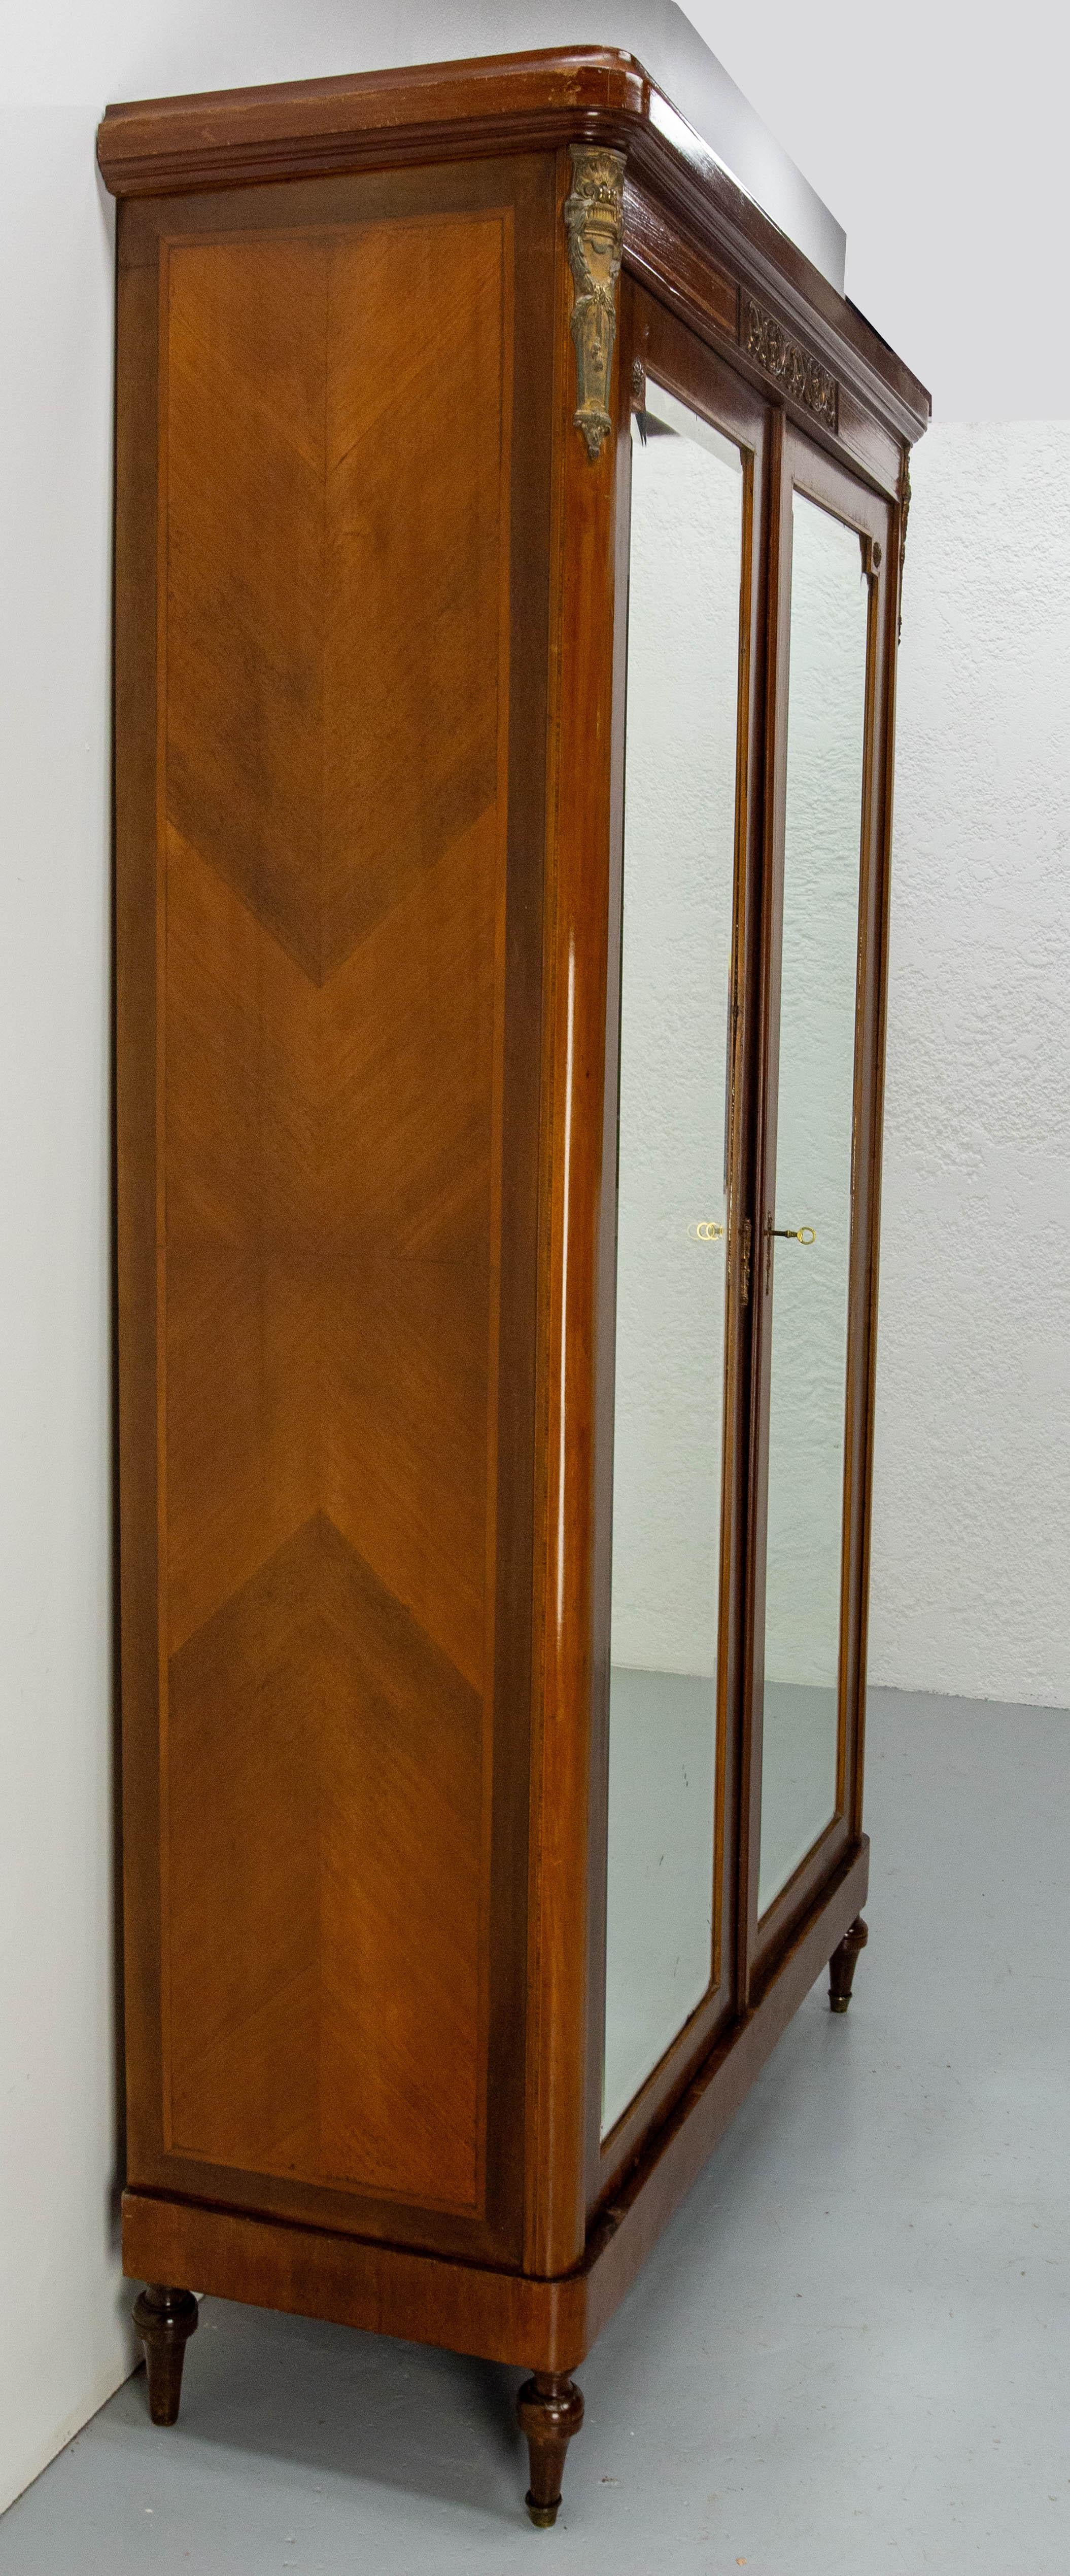 Louis XVI French Iroko & Brass Armoire Beveled Mirrors in the Louis 16 Revival Style, 1900 For Sale